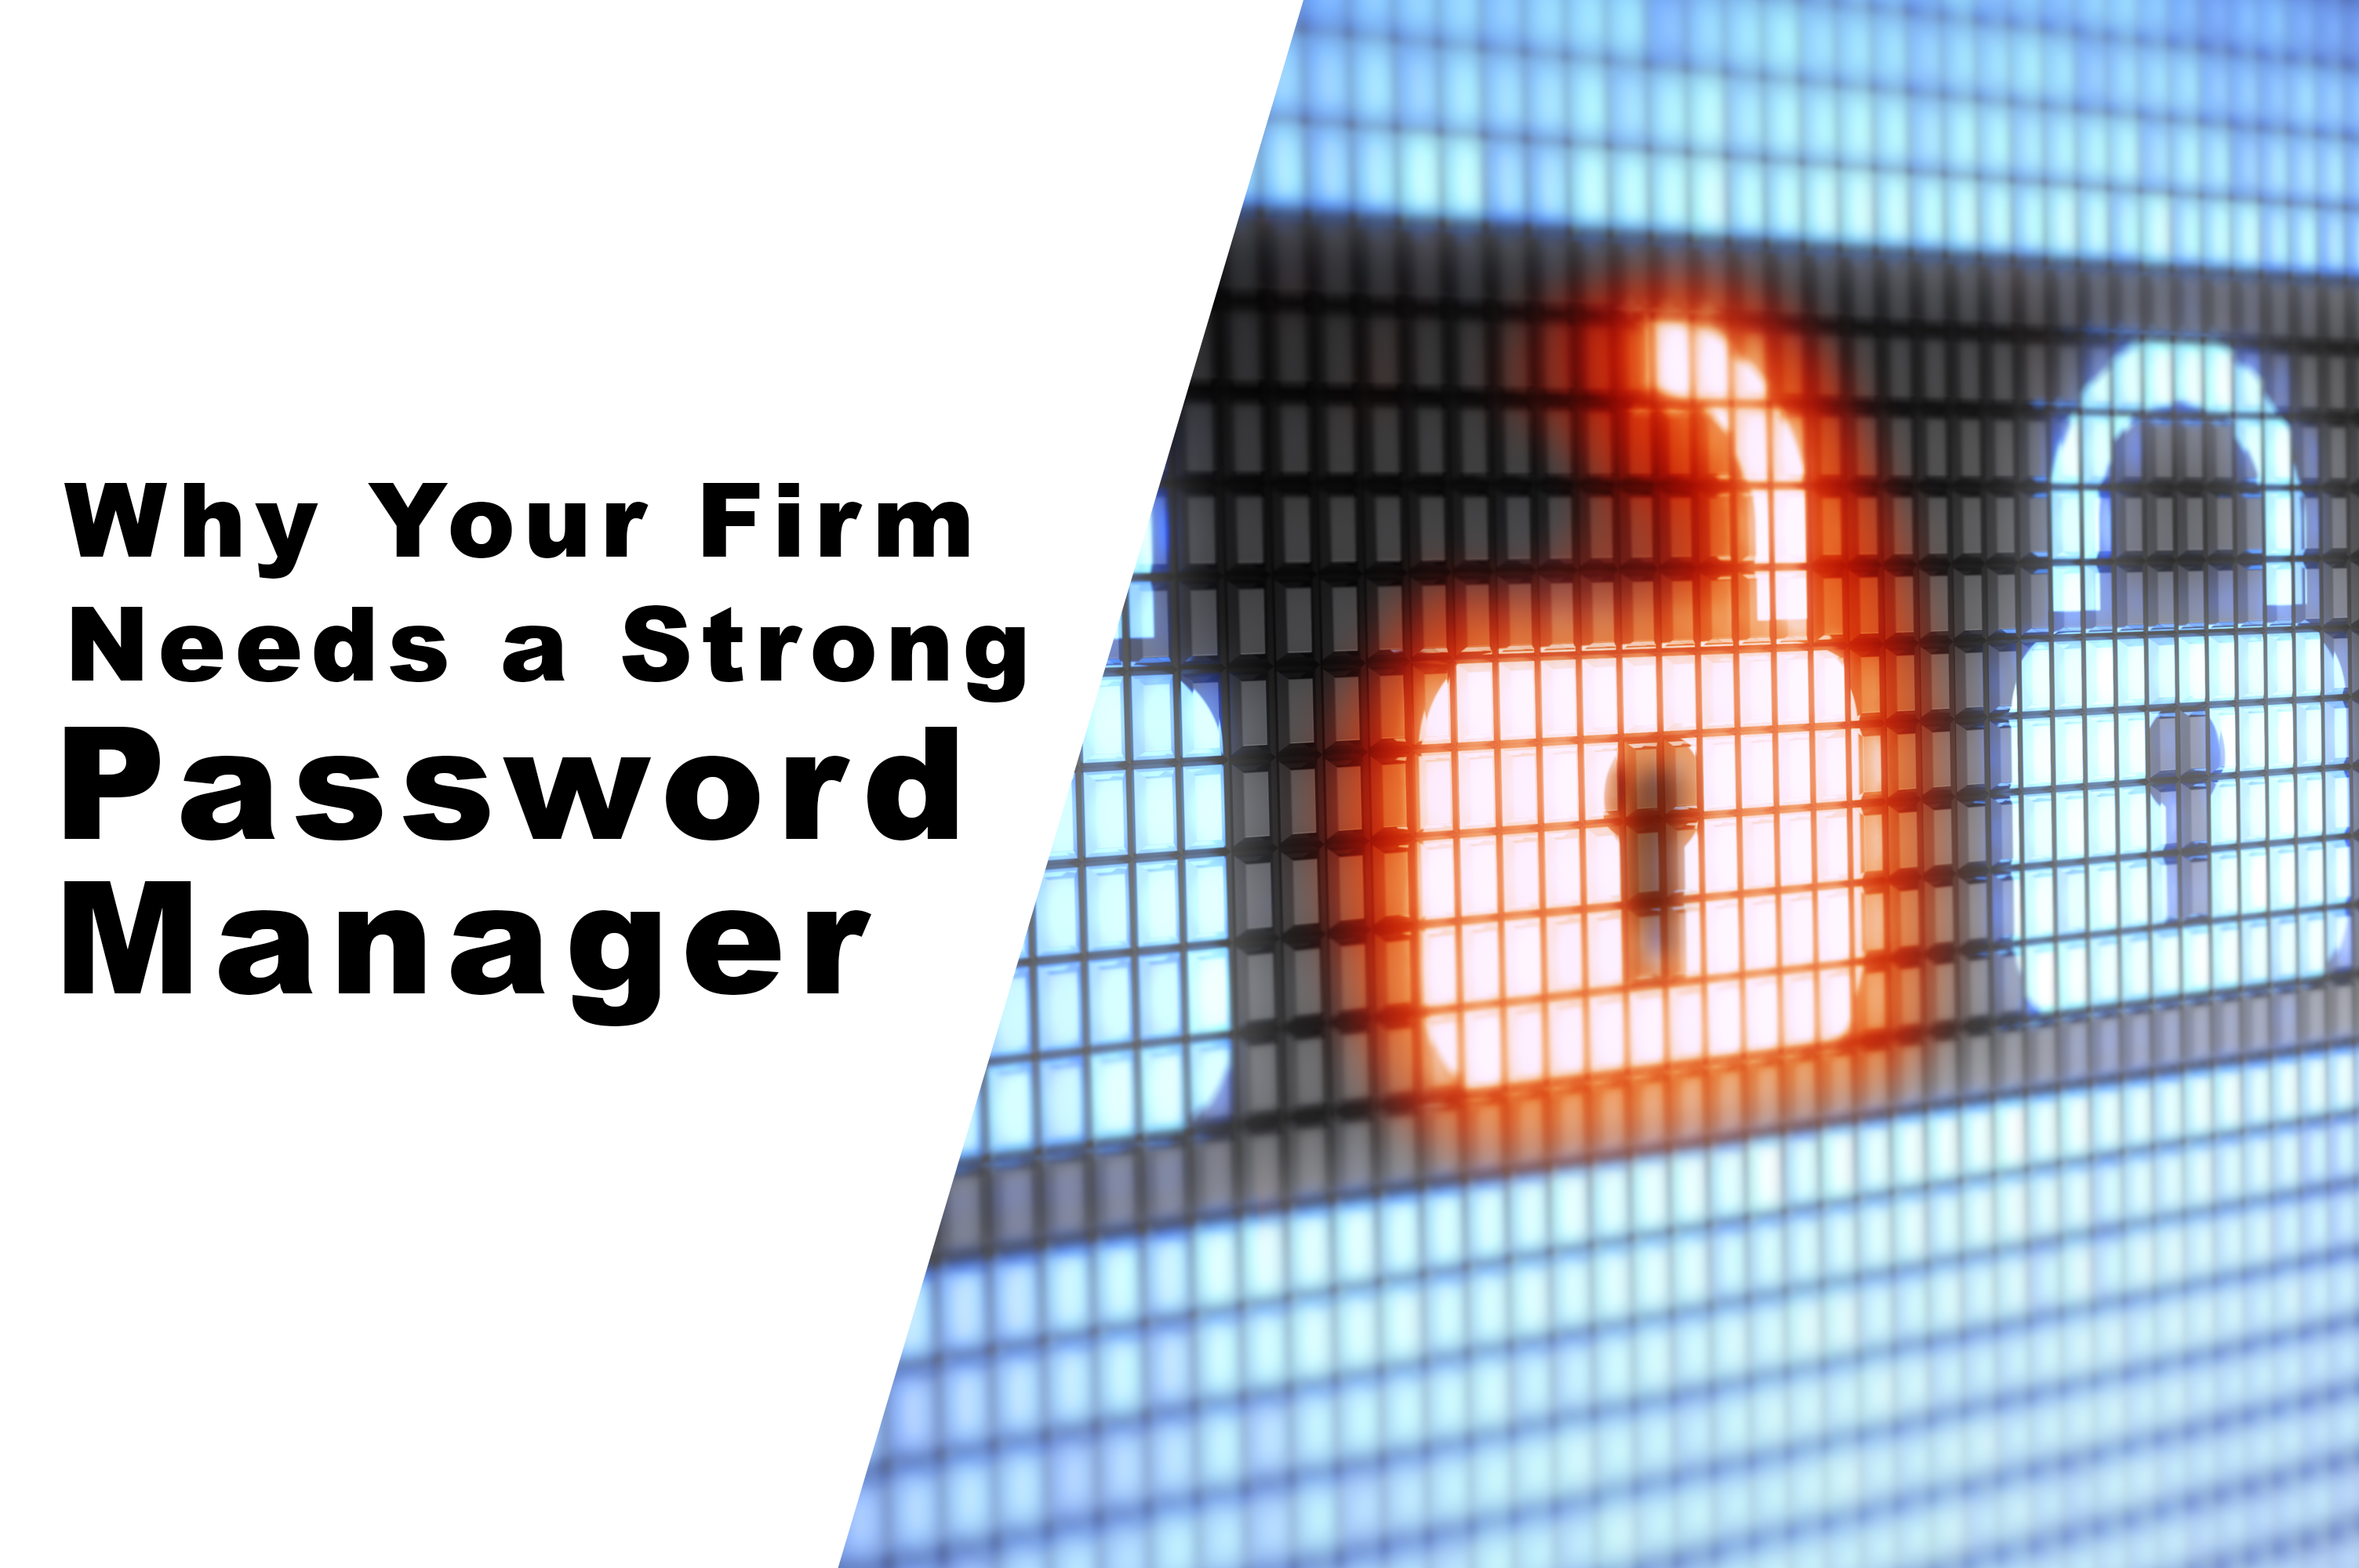 Why Your Firm Needs a Strong Password Manager